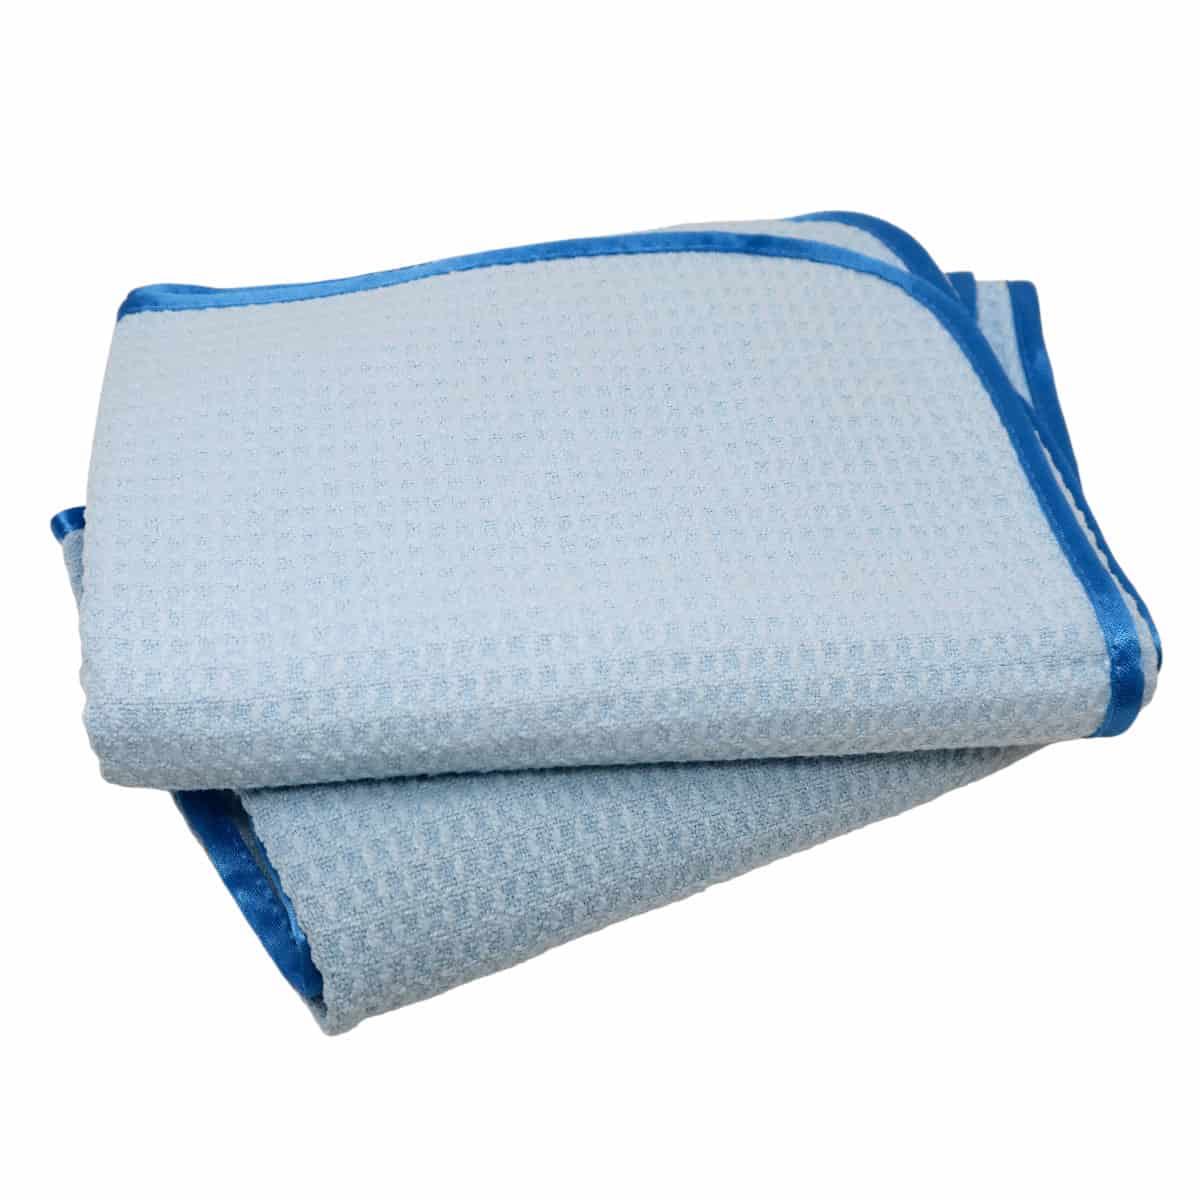 Chemical Guys Microfibre Towel Combo: Buy 2x Super Absorber Waffle Drying Towels & Get 3x Super Soft Cleaning Towels FREE 4